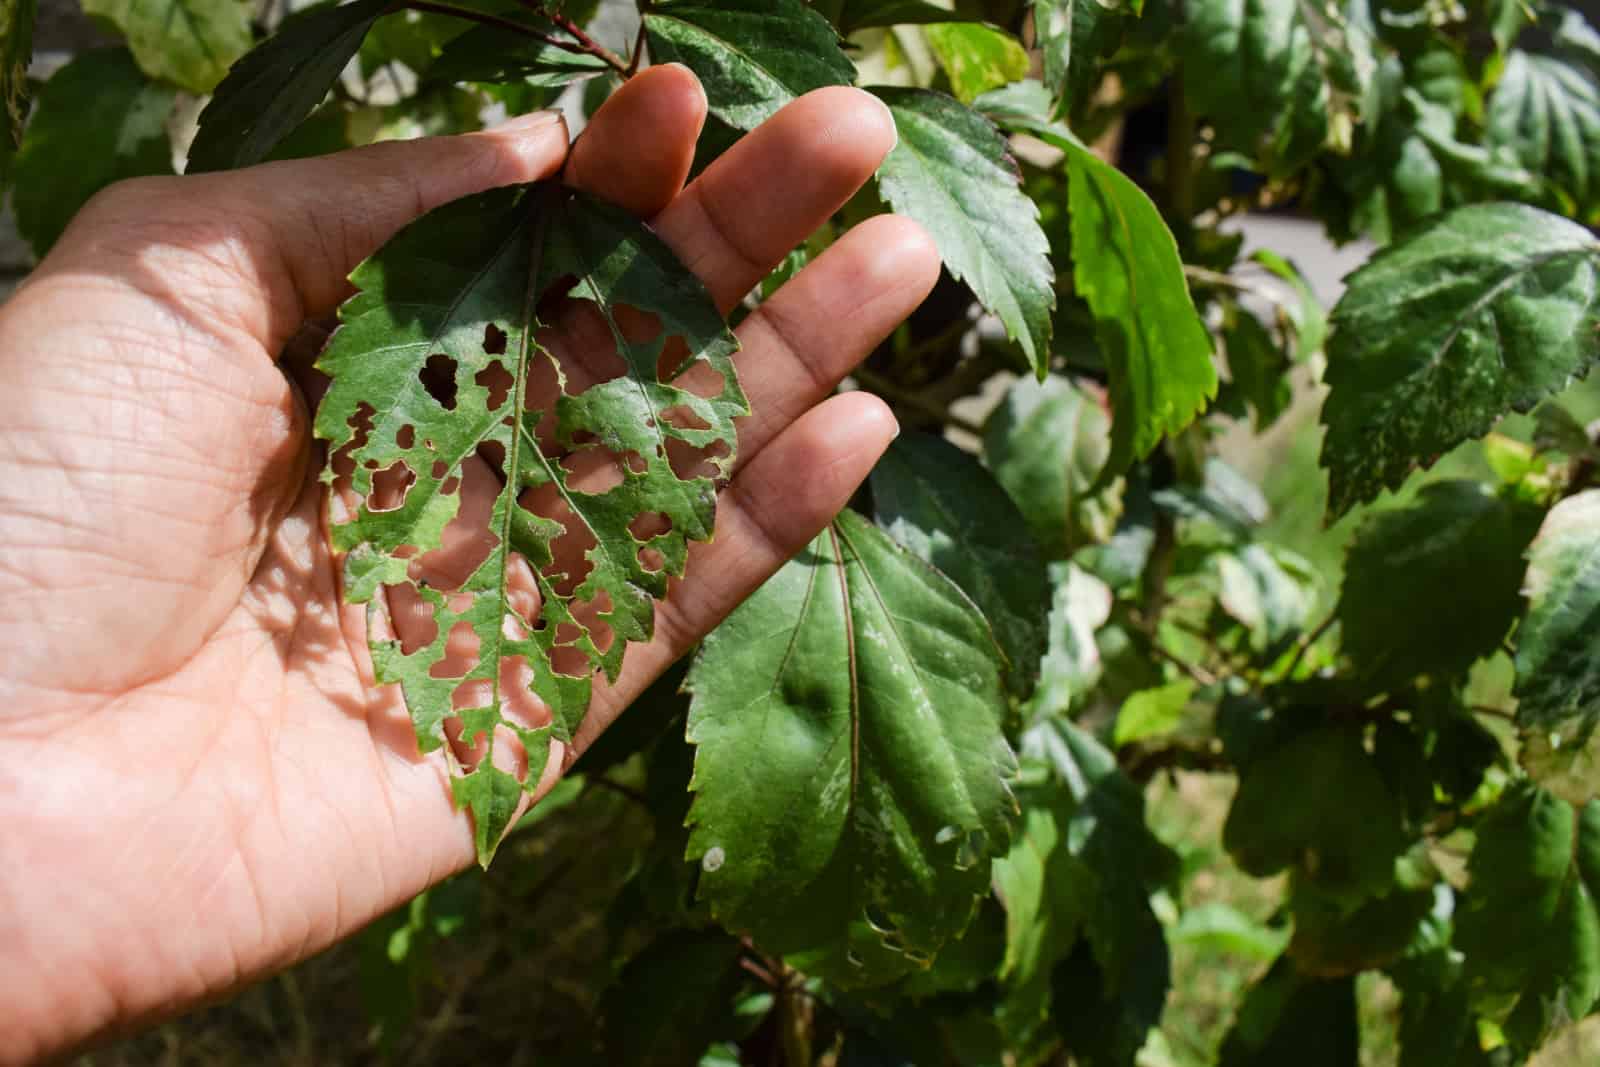 hibiscus leaf damaged by pests